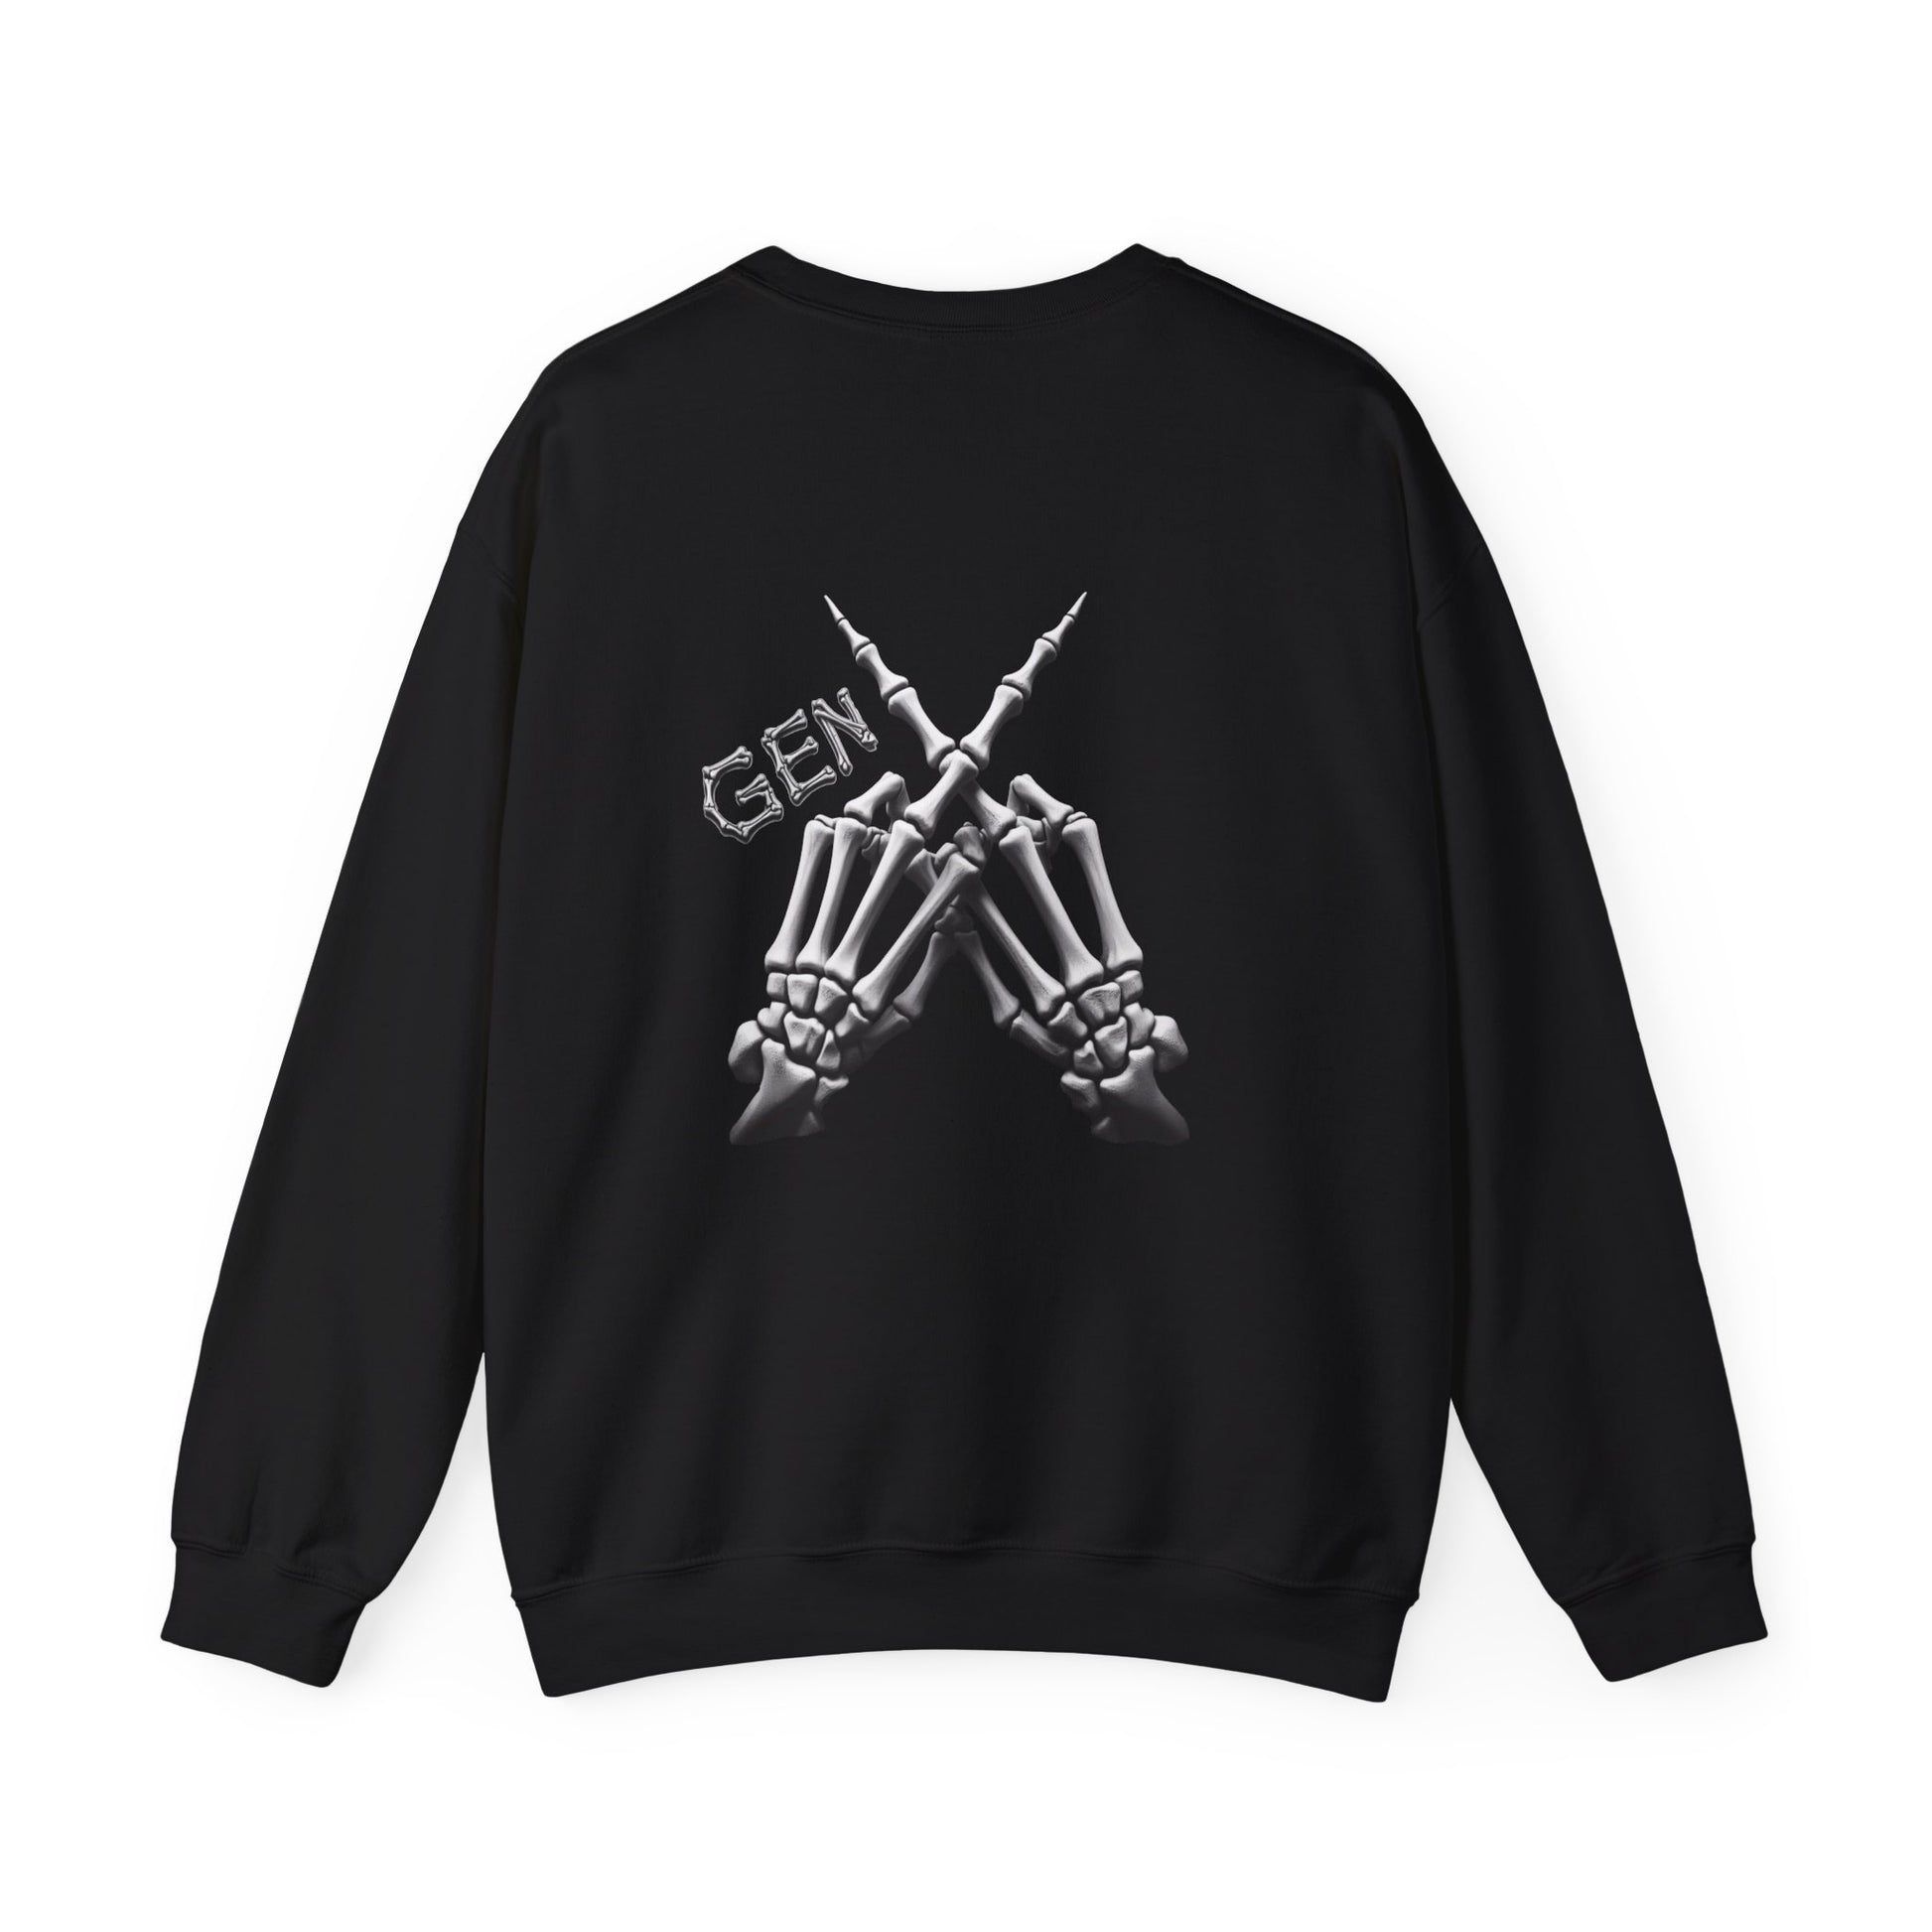 On the front, a skeletal middle finger throws shade (in the most epic way). But wait, there's more! On the back, two skeletal hands form an "X" with the fingers, declaring your place in "Gen X Forever". “Unleash Your Inner Rebel with Our Skeleton Hand Hoodie”